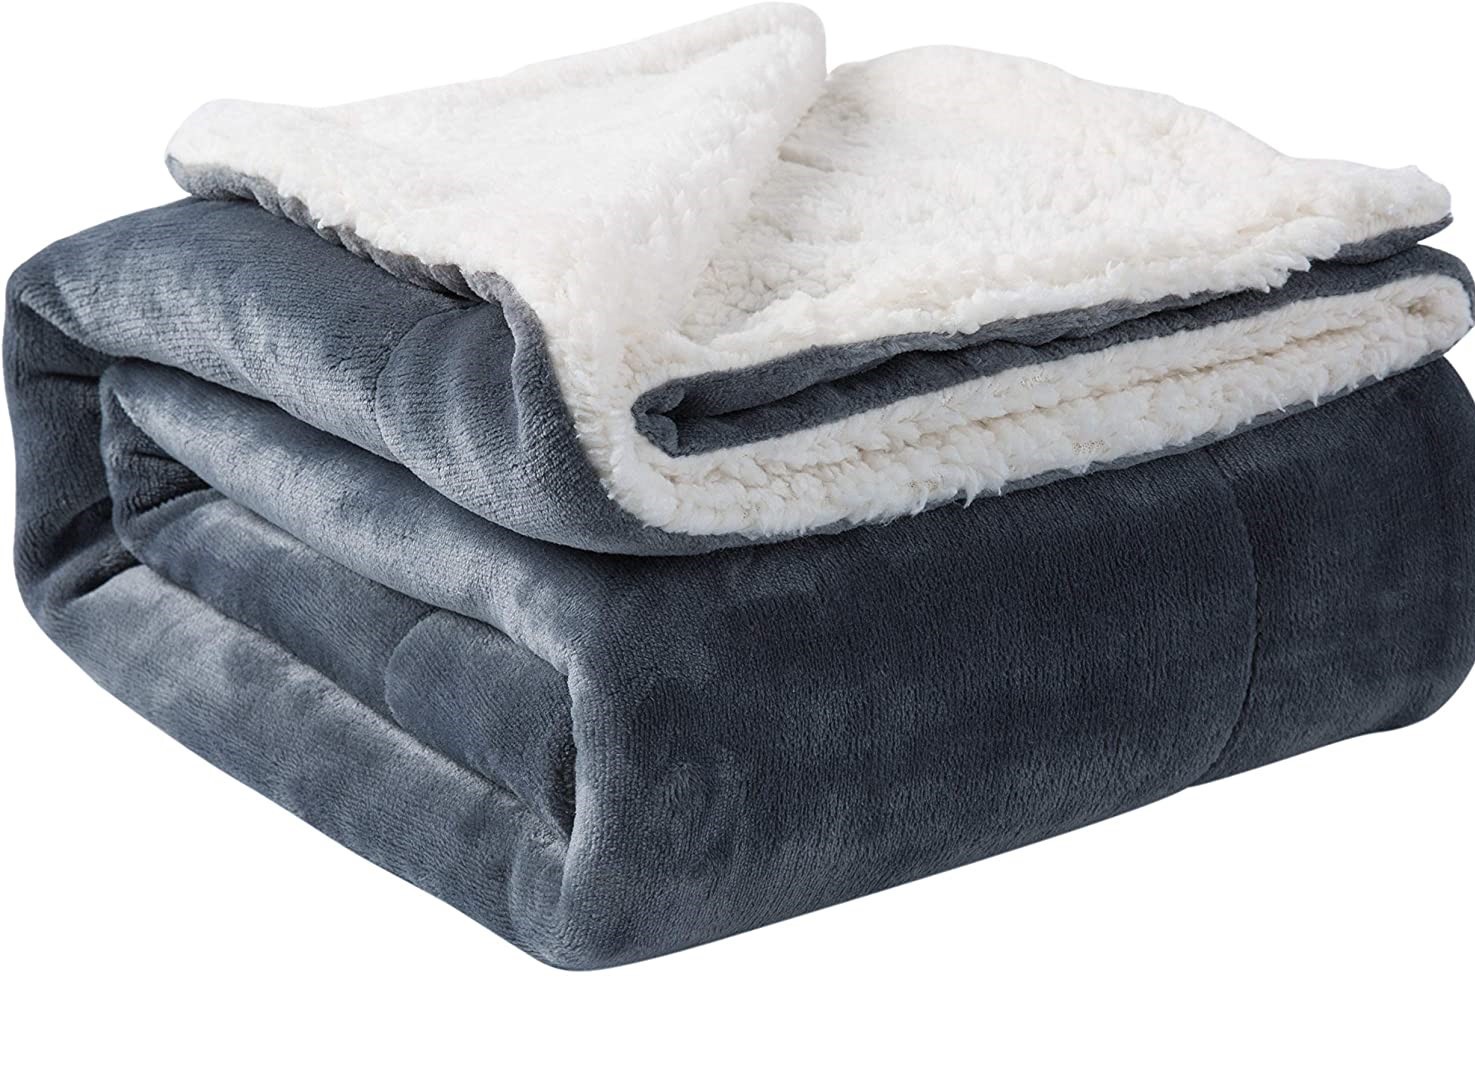 Buy Comfy King Size Sheep Fur Blanket Grey Online Shop Home And Garden On Carrefour Uae